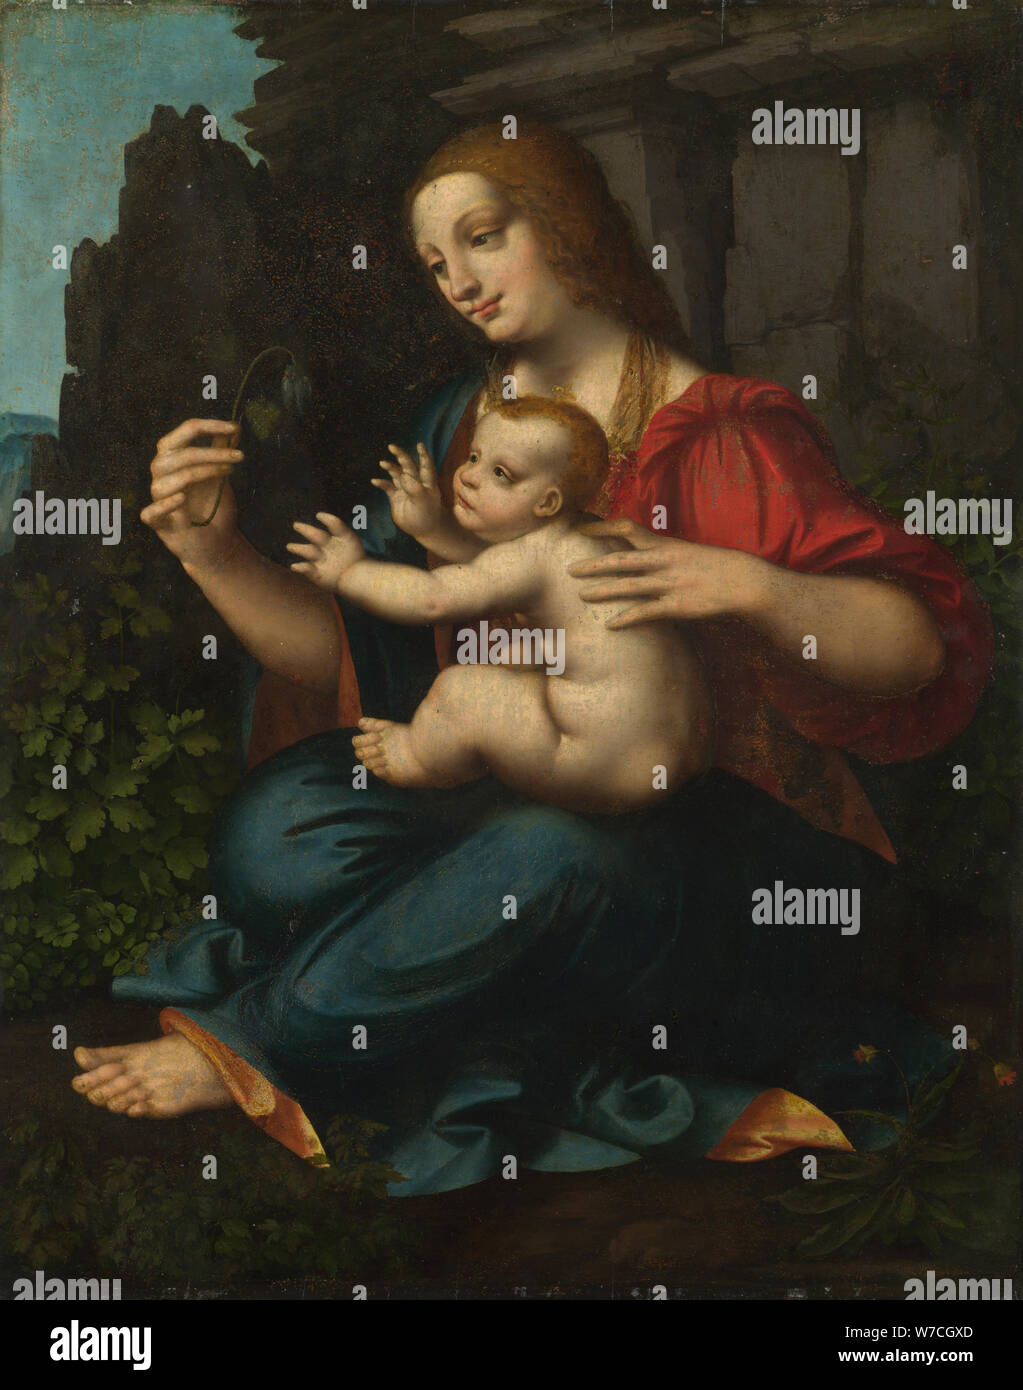 The Virgin and Child, c1520. Stock Photo